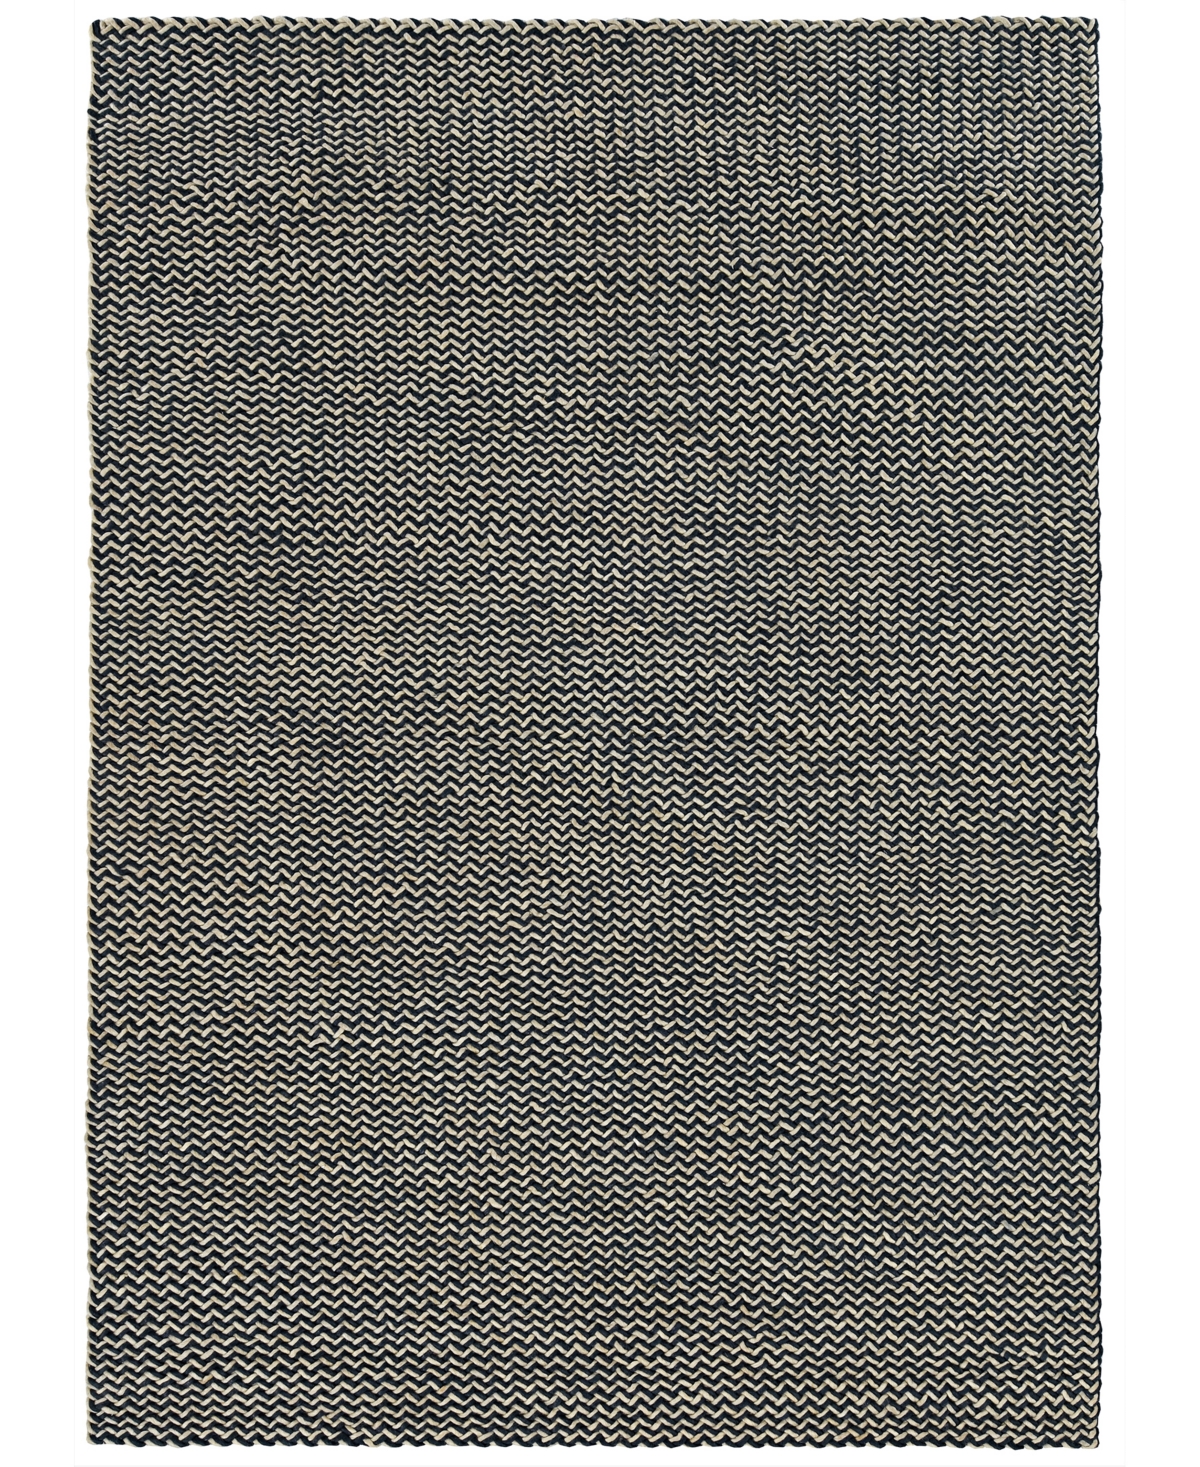 Km Home Bellissima 19 8' X 10' Area Rug In Midnight